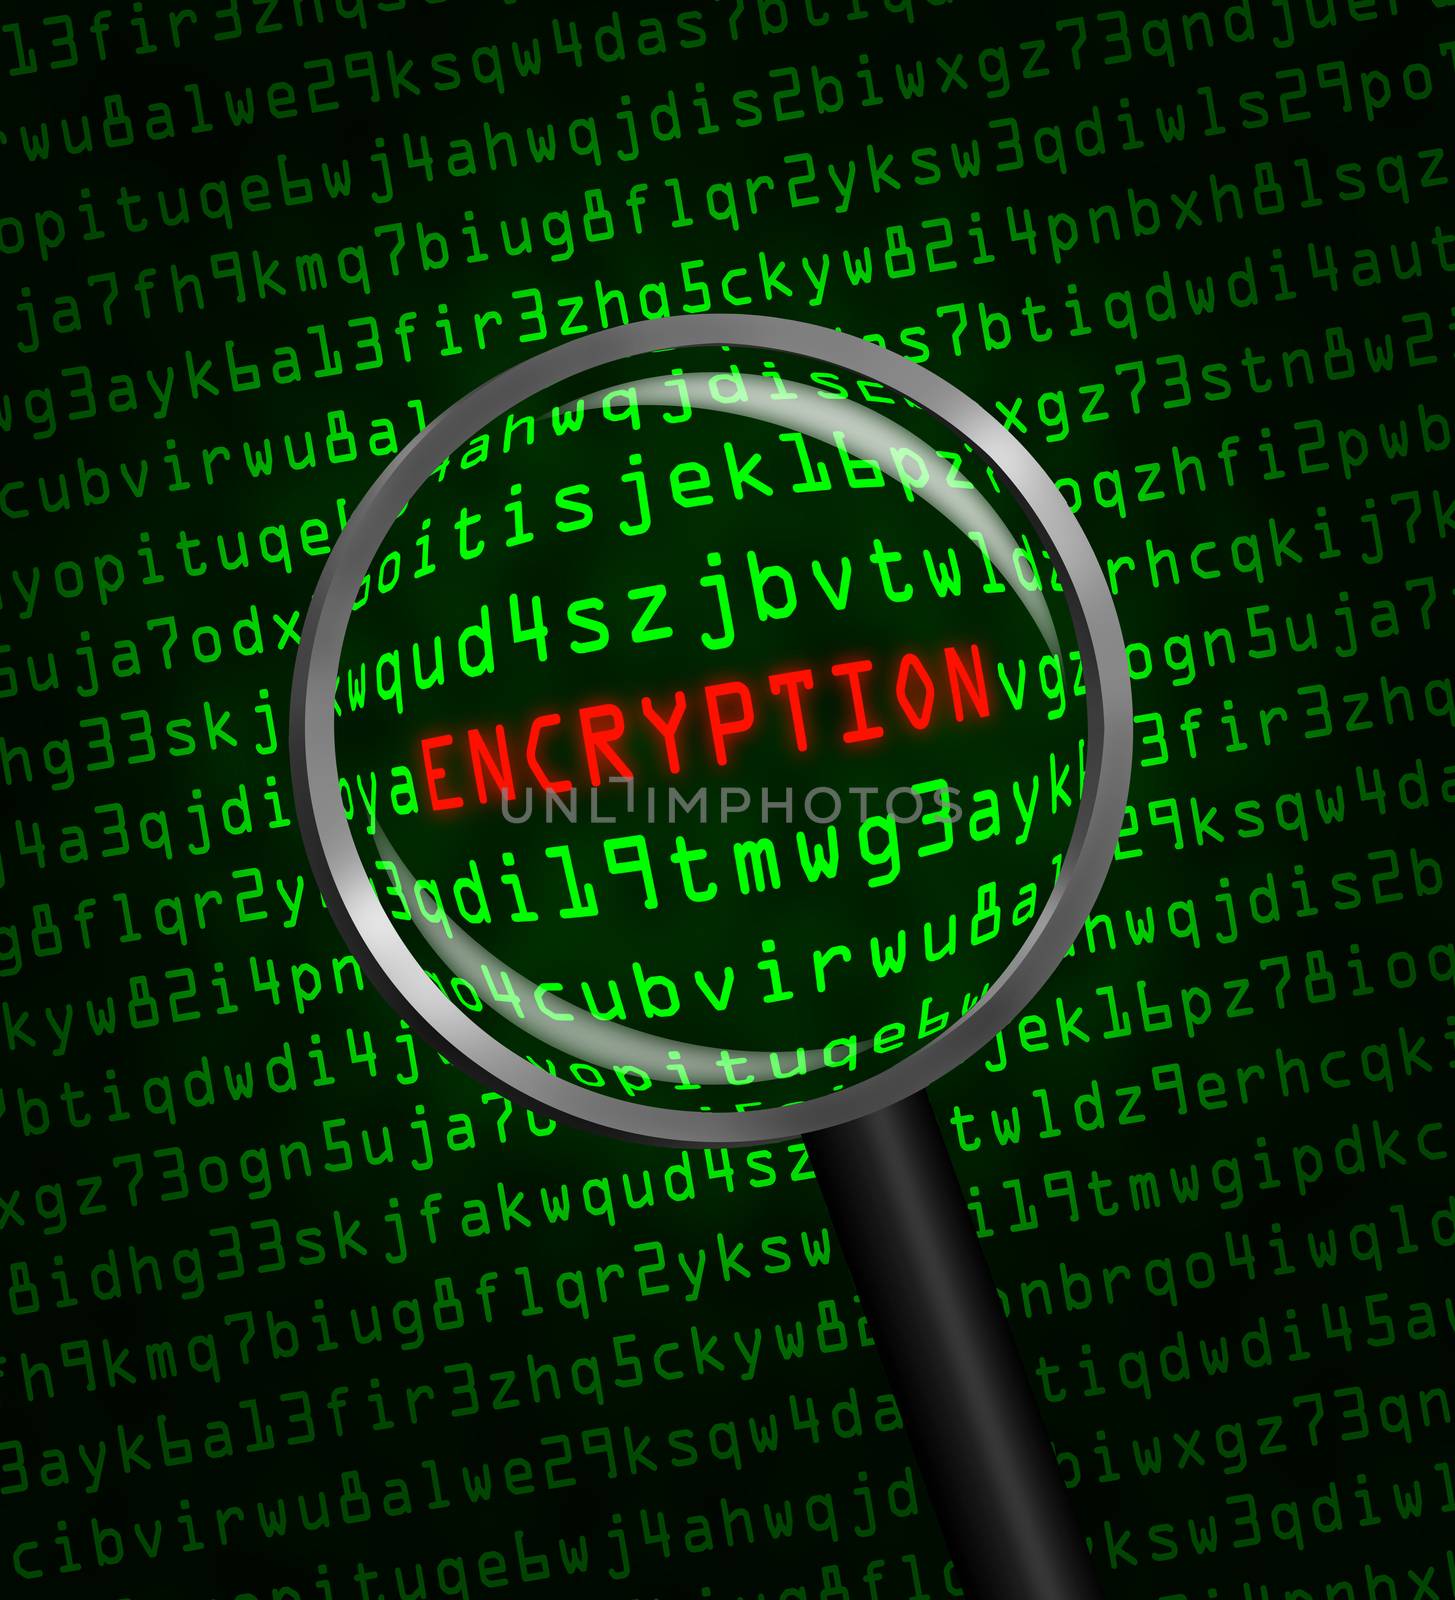 "ENCRYPTION" revealed in computer code through a magnifying glas by Balefire9